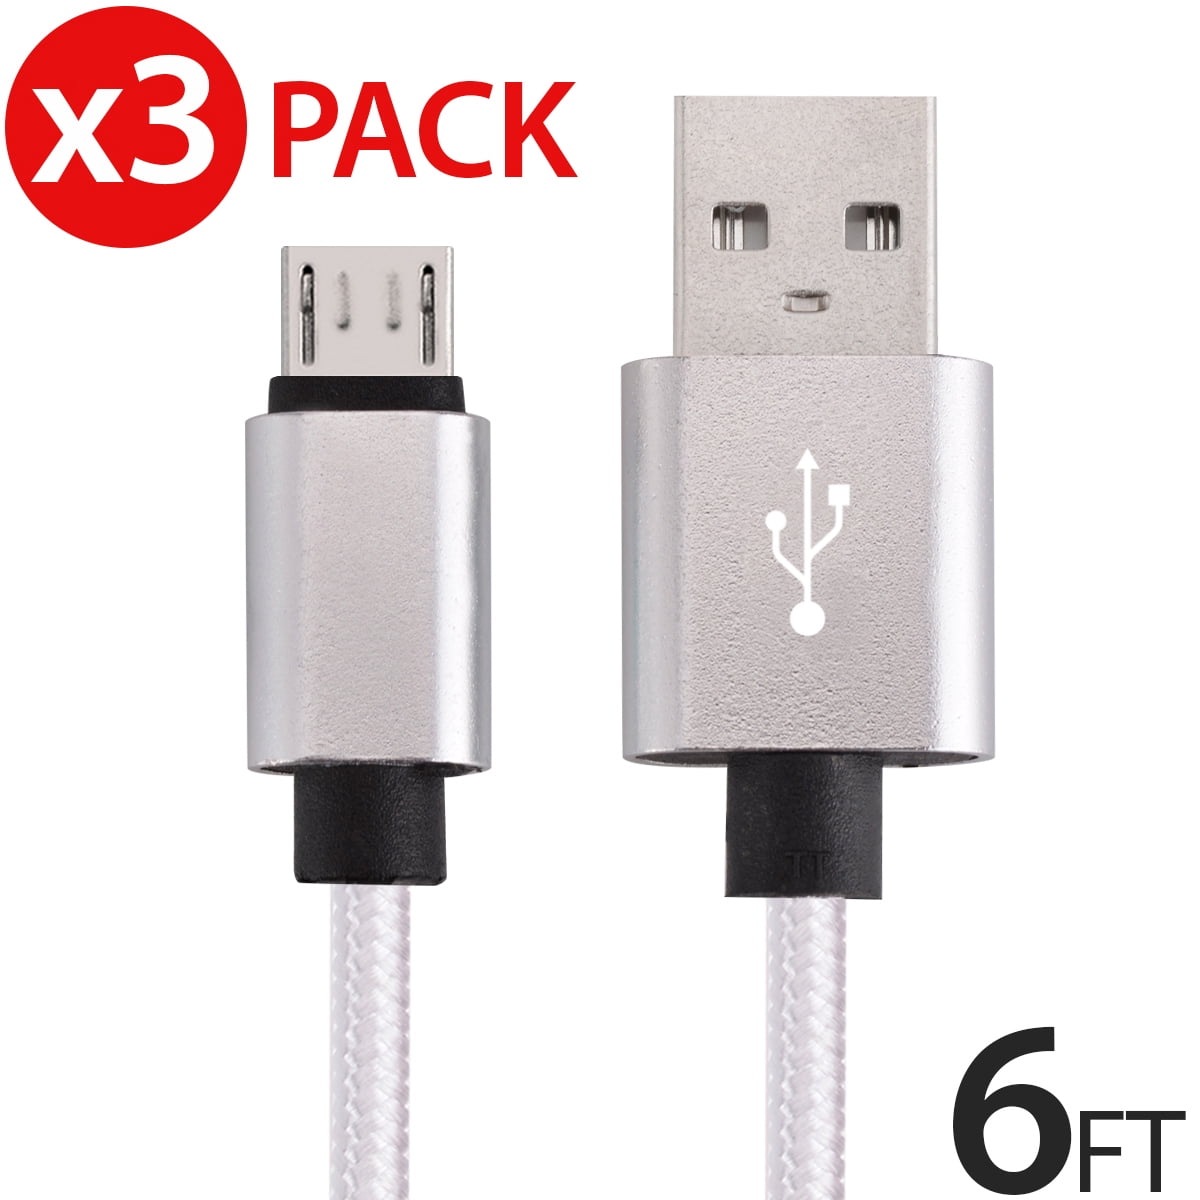 4ft 6ft & 10ft Micro USB FAST Charger Data Sync Cable for Tablets 3 Size Pack 